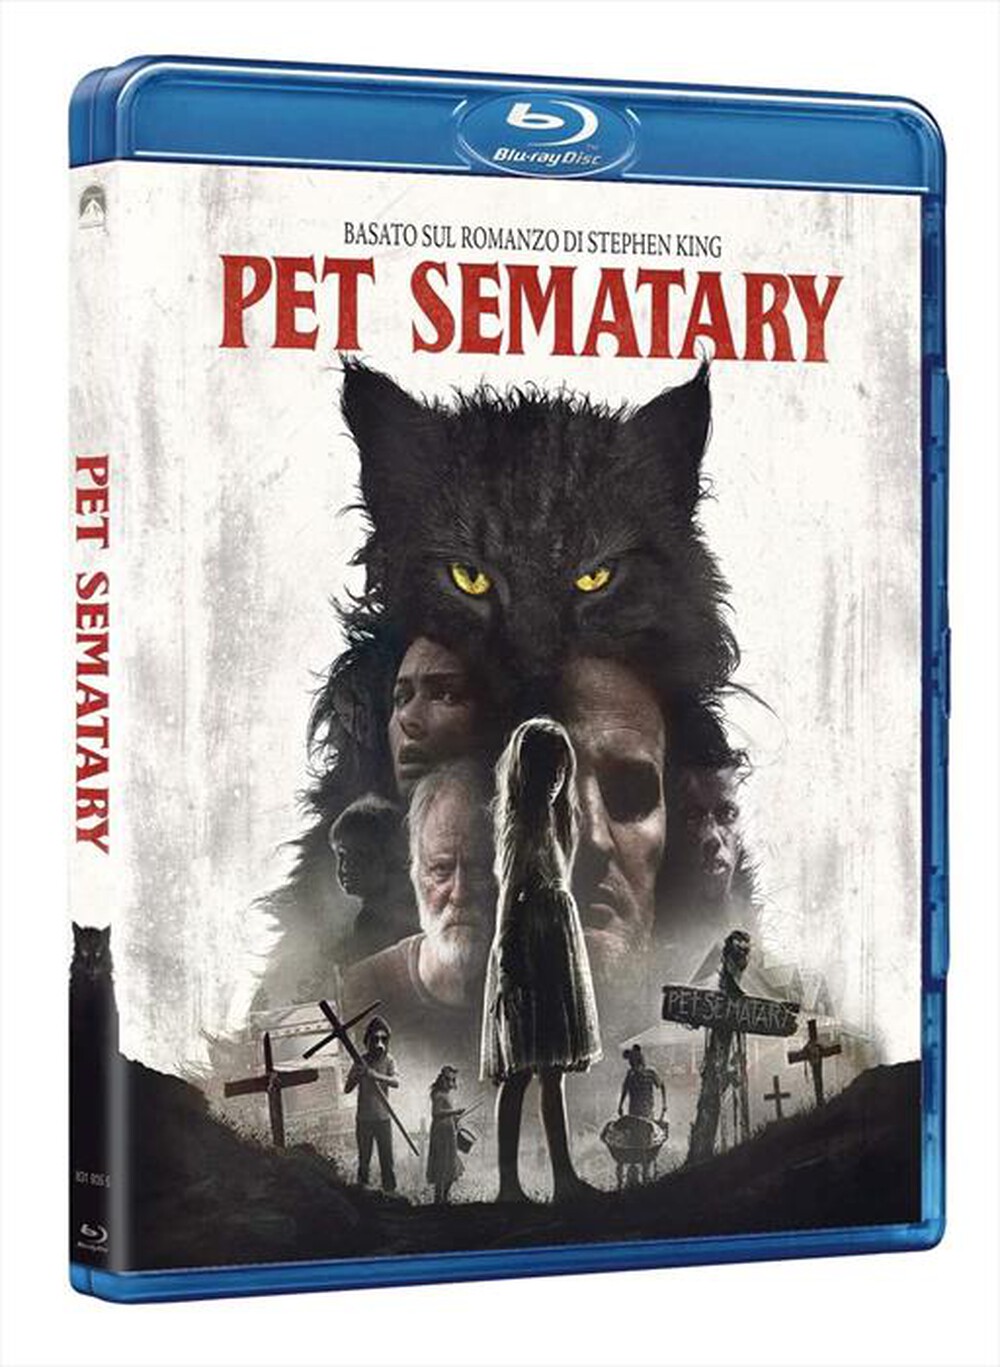 "Paramount Pictures - Pet Sematary"